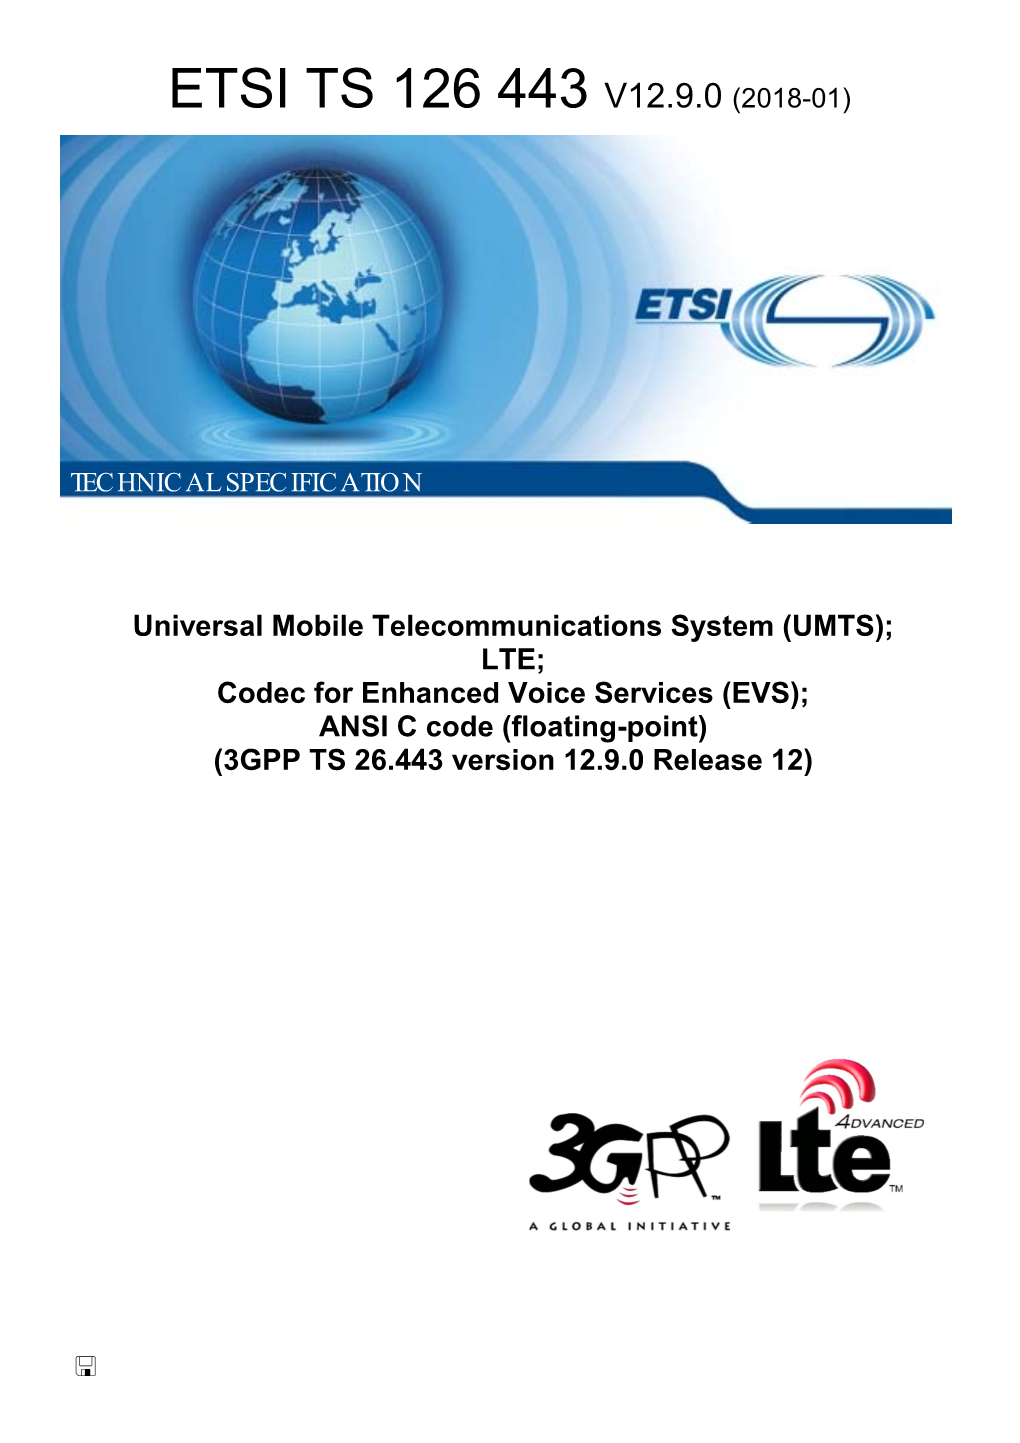 LTE; Codec for Enhanced Voice Services (EVS); ANSI C Code (Floating-Point) (3GPP TS 26.443 Version 12.9.0 Release 12)